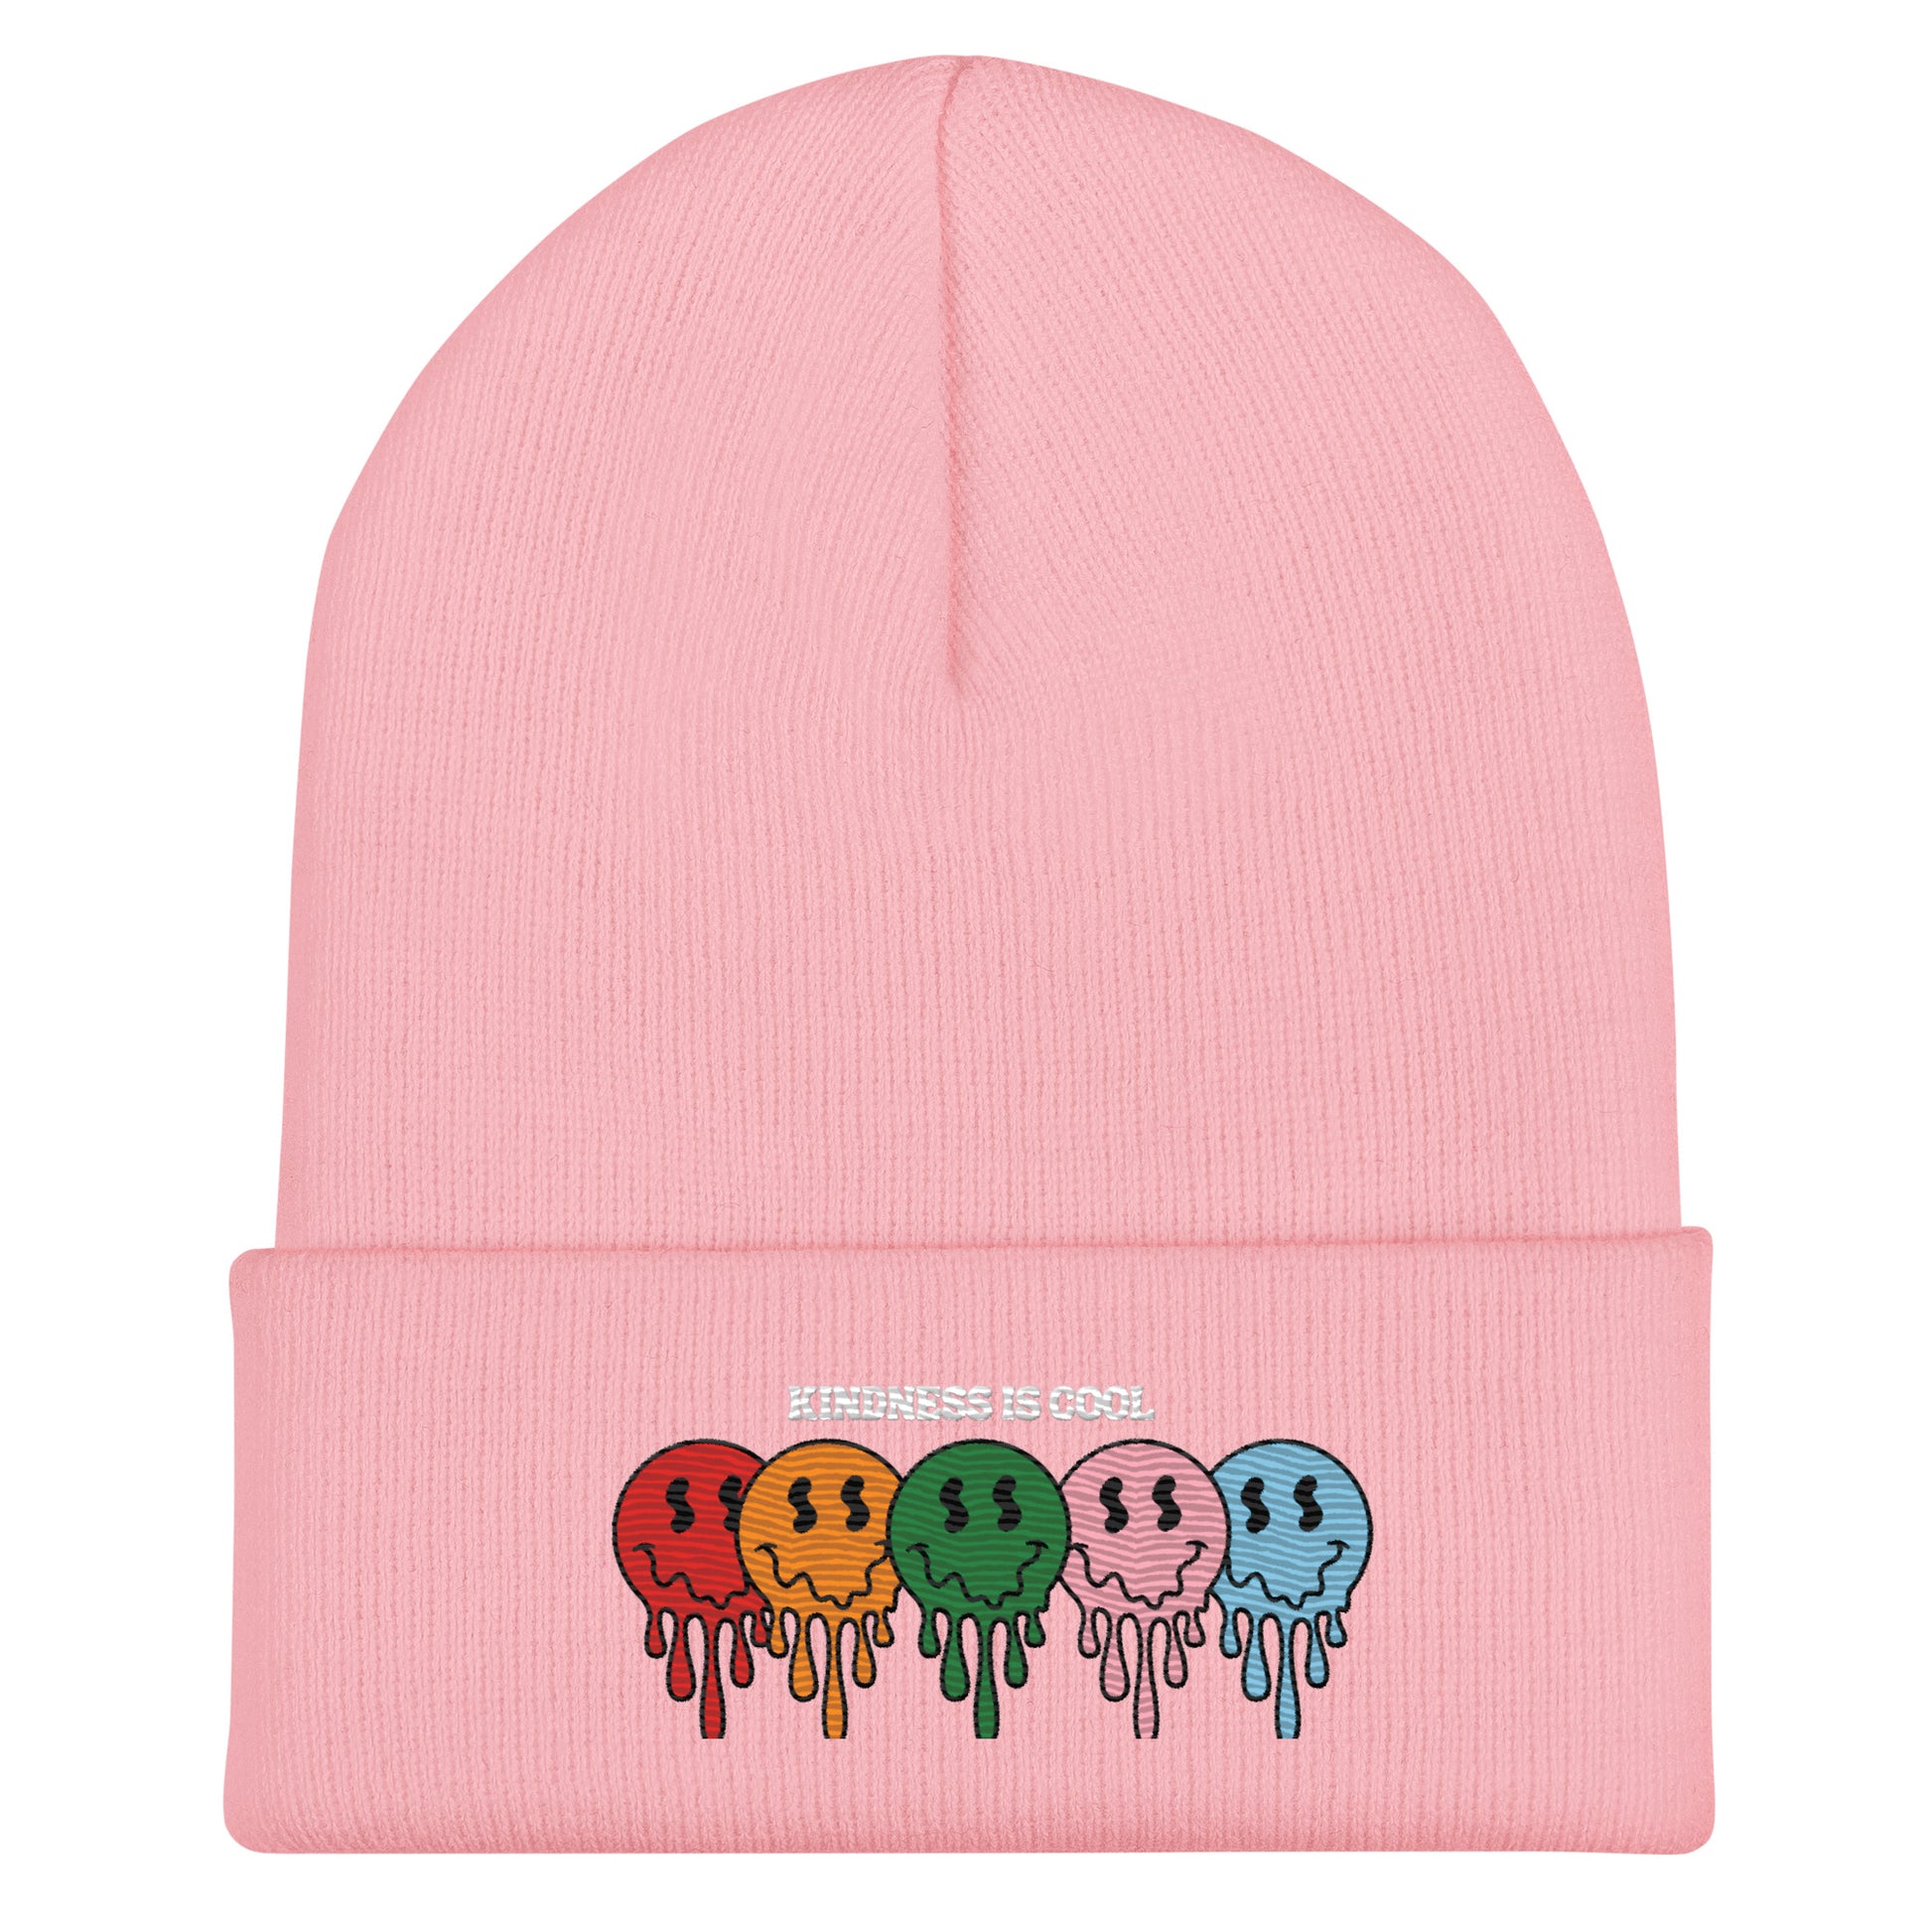 Kindness Is Cool Cuffed Beanie - Rose Gold Co. Shop